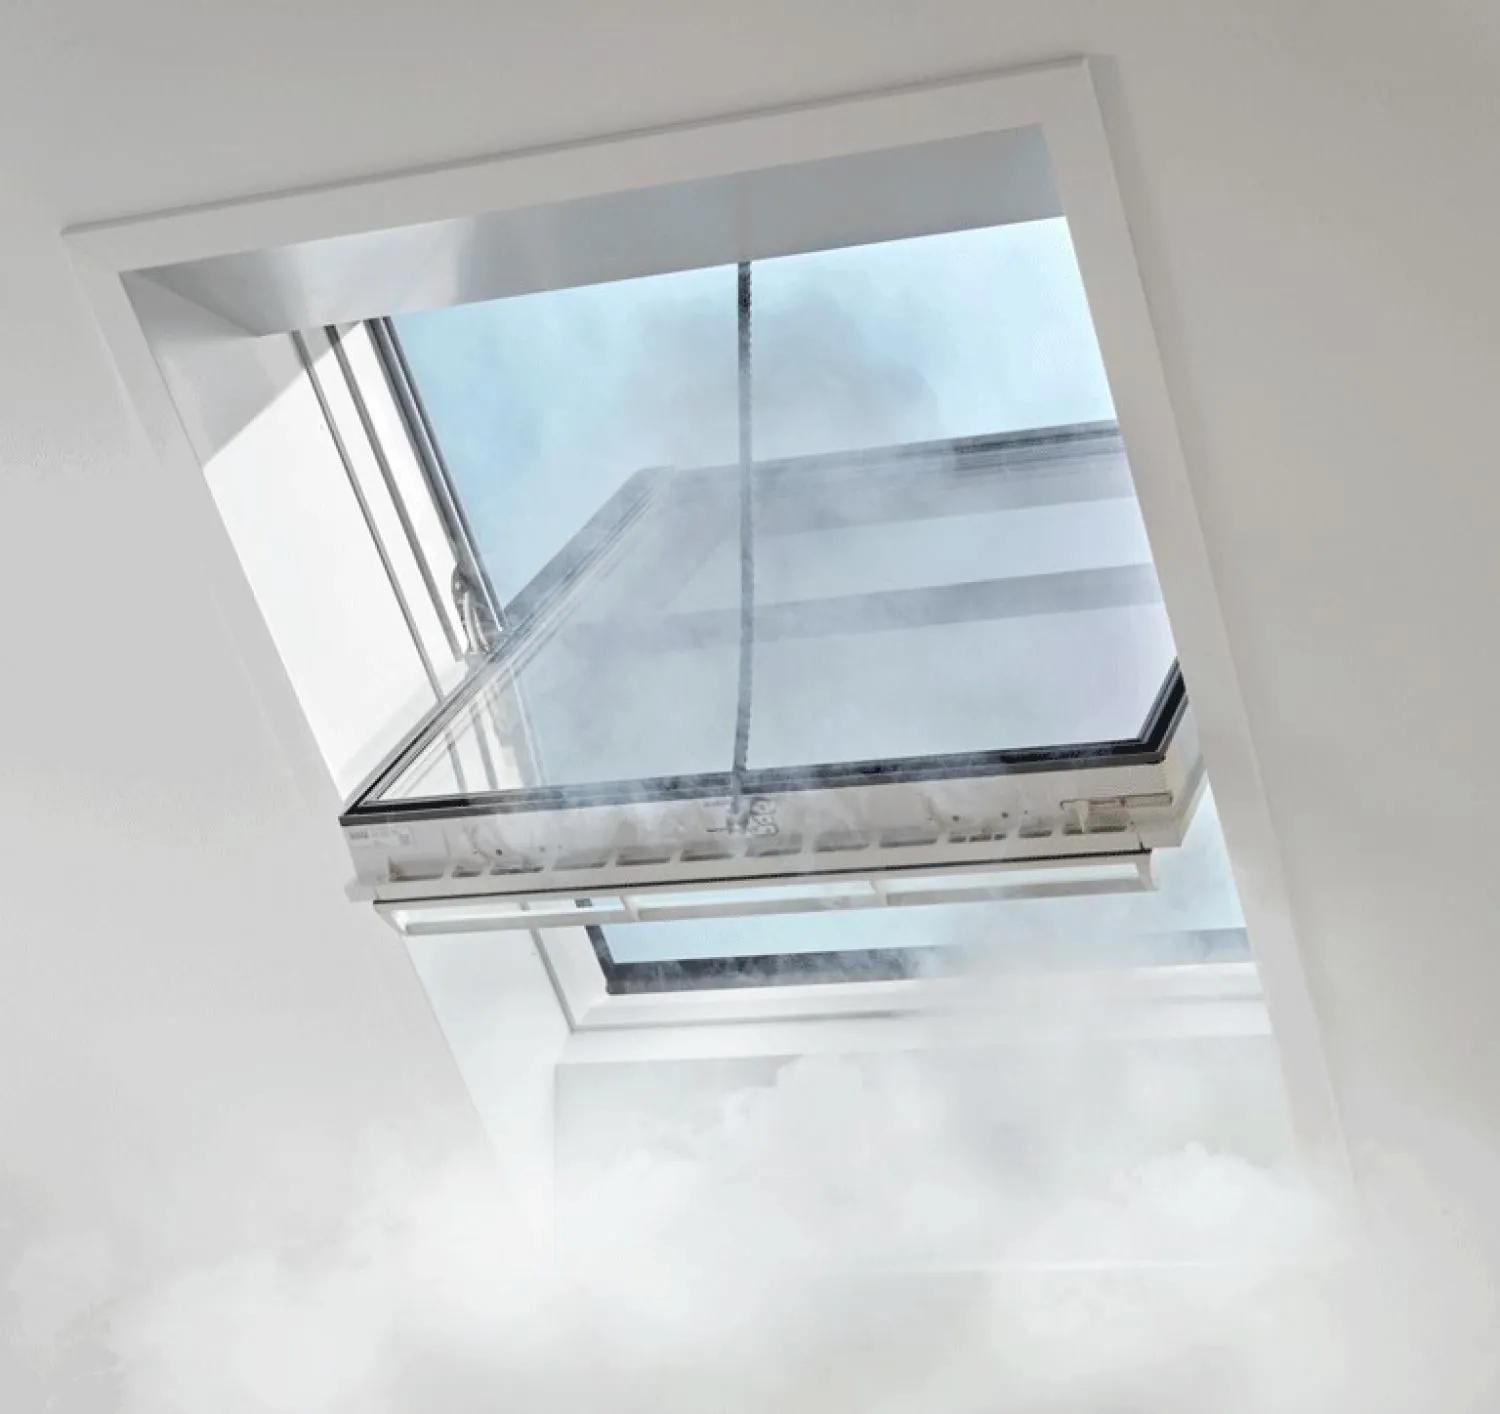 Velux Smoke Vent Window Slate 1340 x 1398 Pitched Roof  GGU UK08 SD0L140